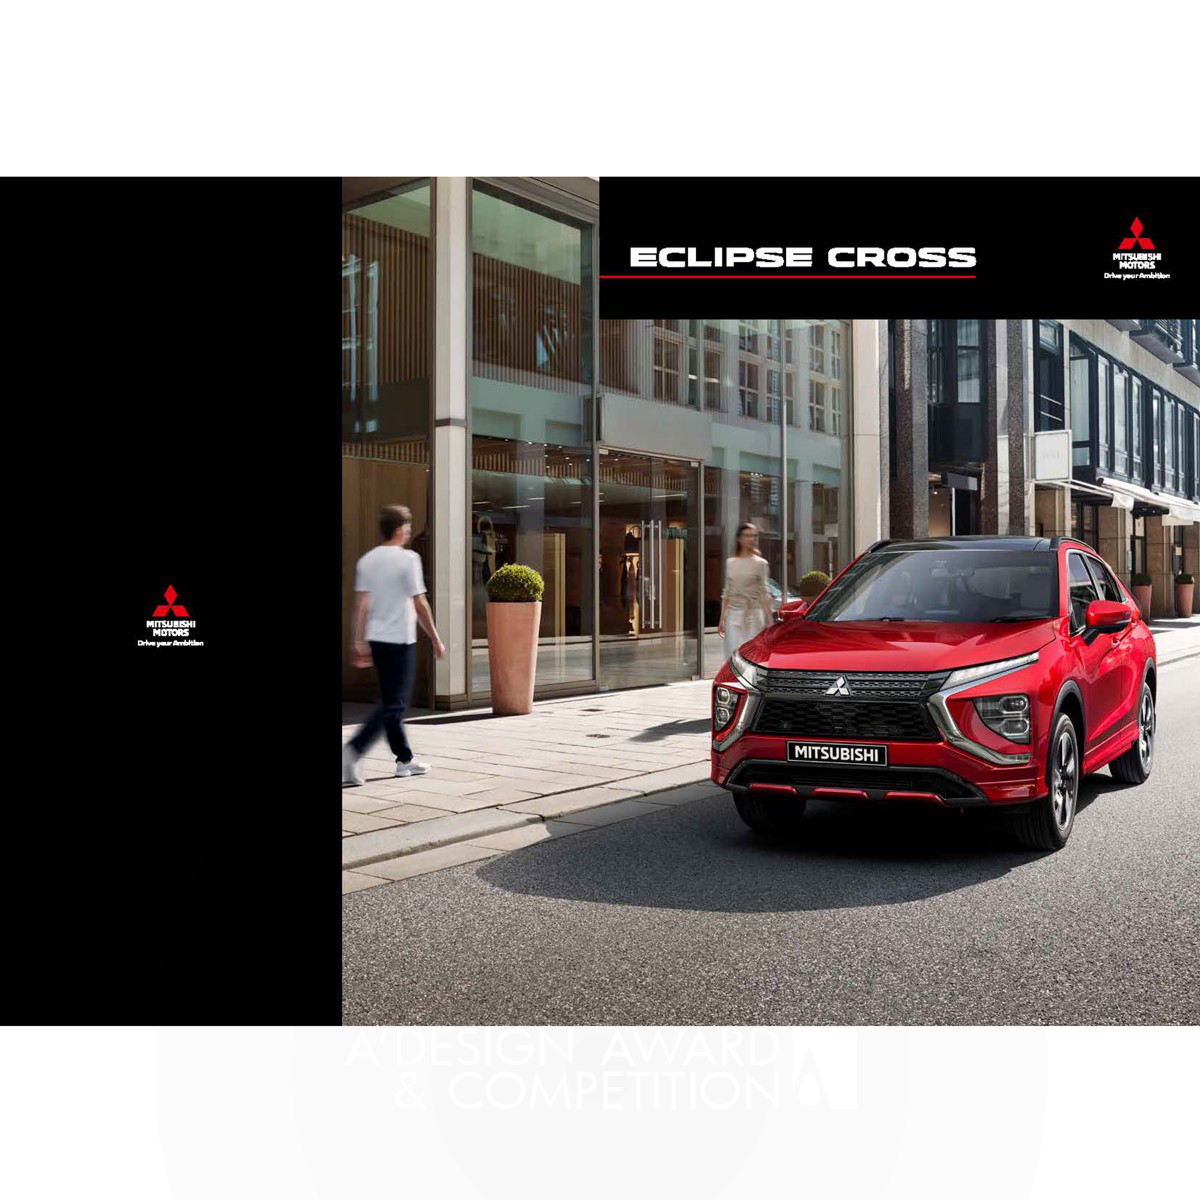 Mitsubishi Motors Eclipse Cross Brochures of Car Products and Functions